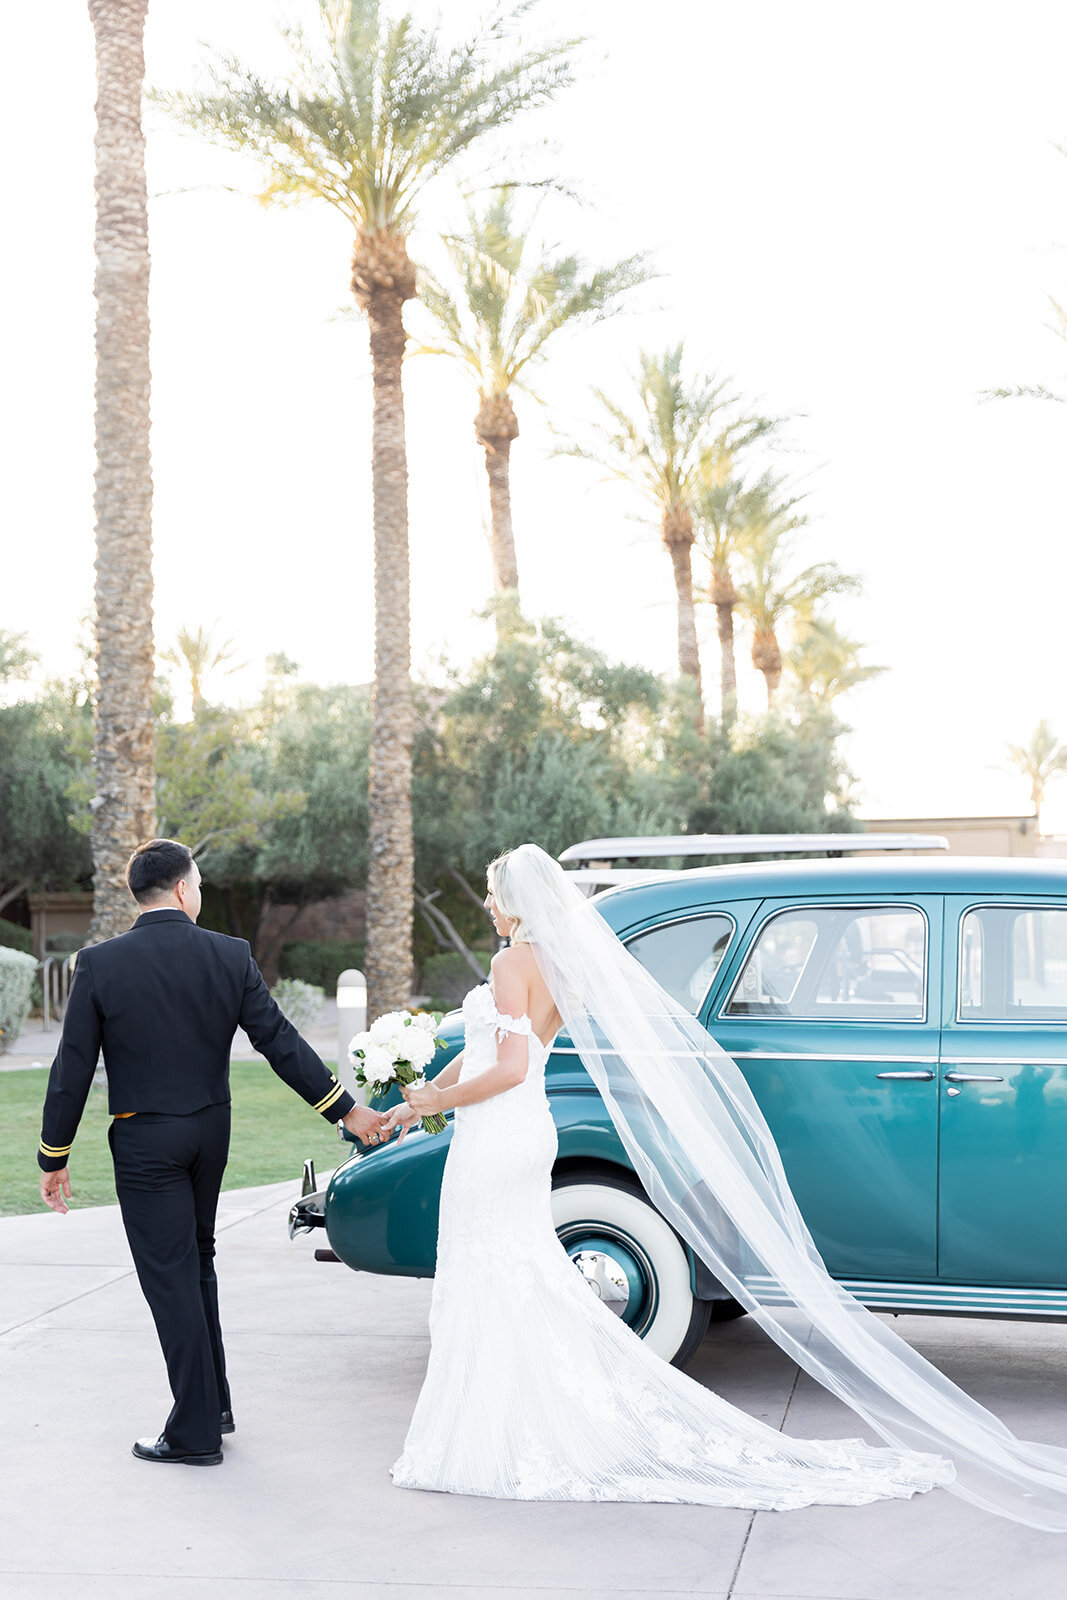 Karlie Colleen Photography - Holly & Ronnie Wedding - Seville Country Club - Gilbert Arizona-697